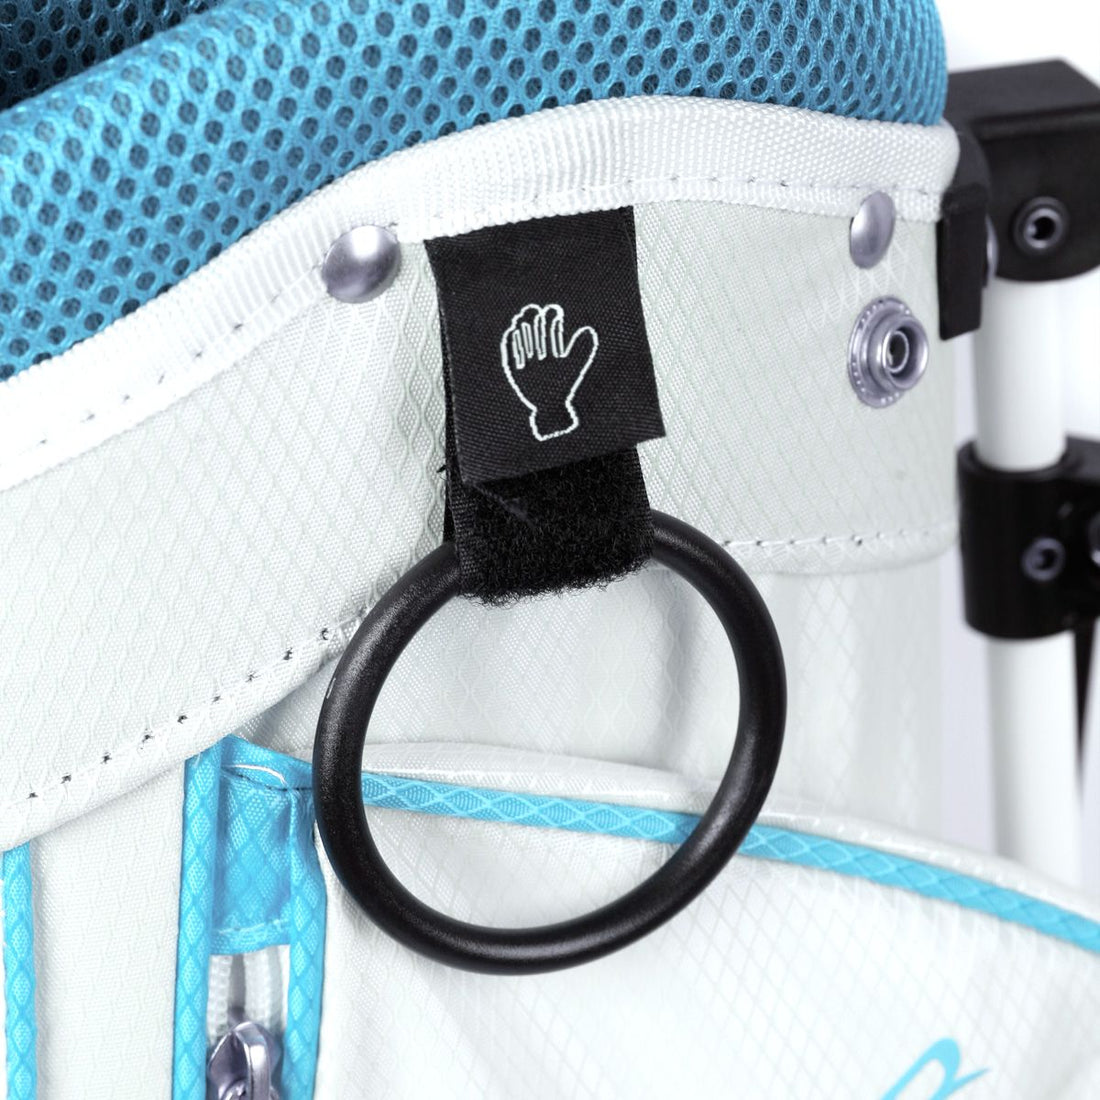 Velcro glove holder and towel ring on a white/sky blue Orlimar ATS Junior Golf Bag